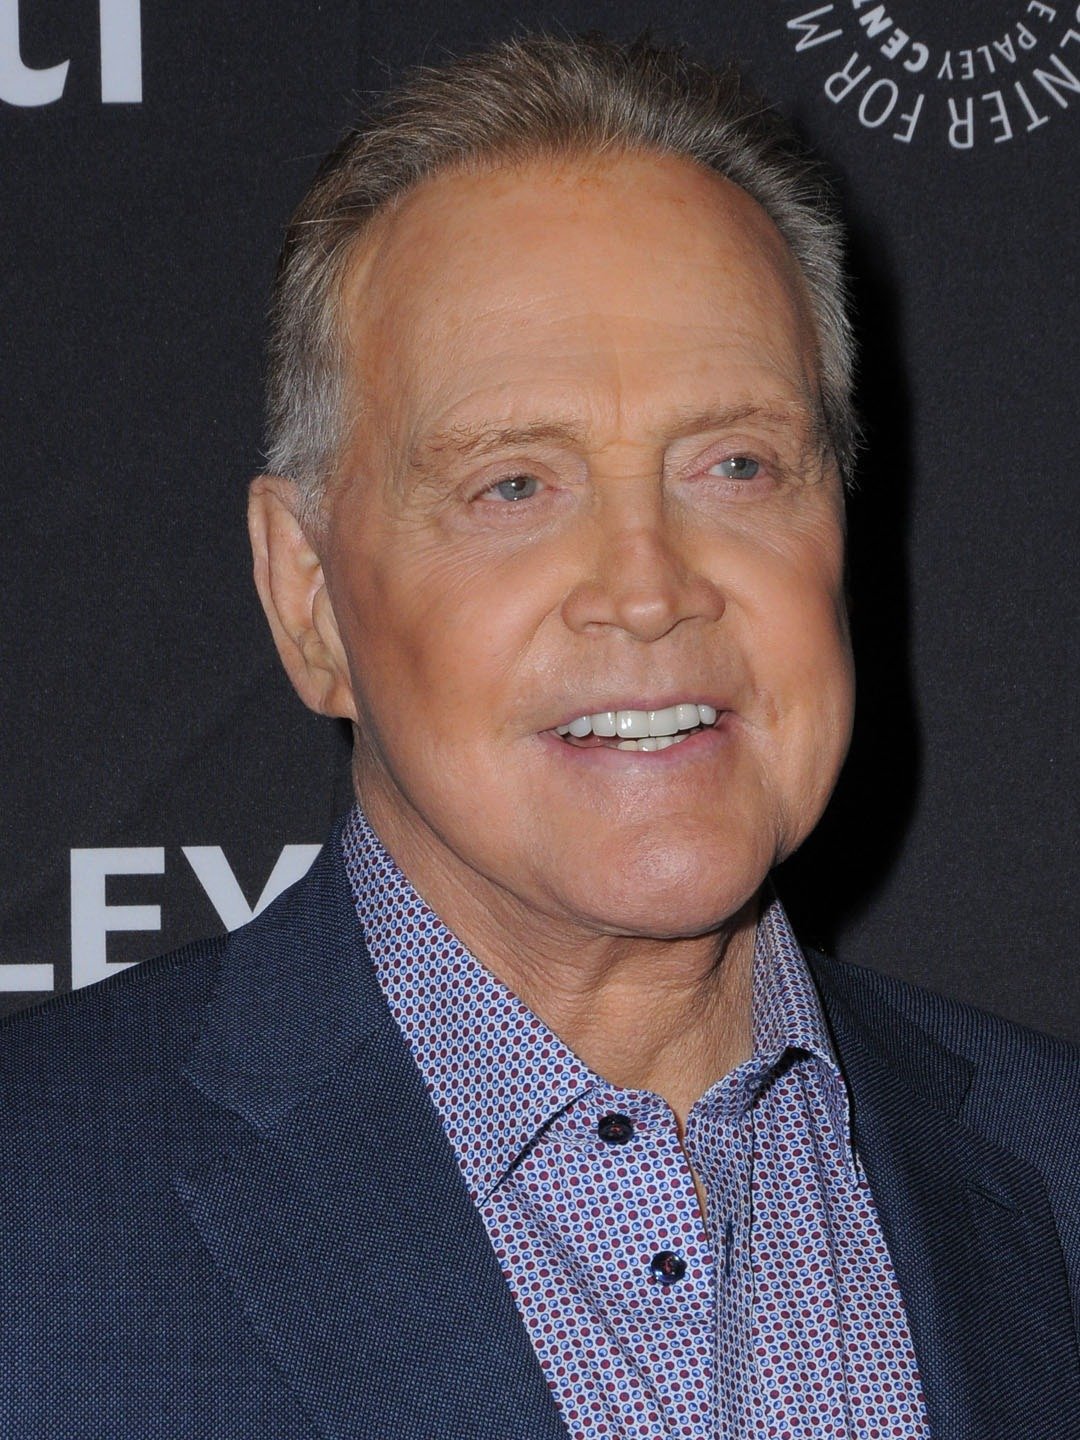 How tall is Lee Majors?